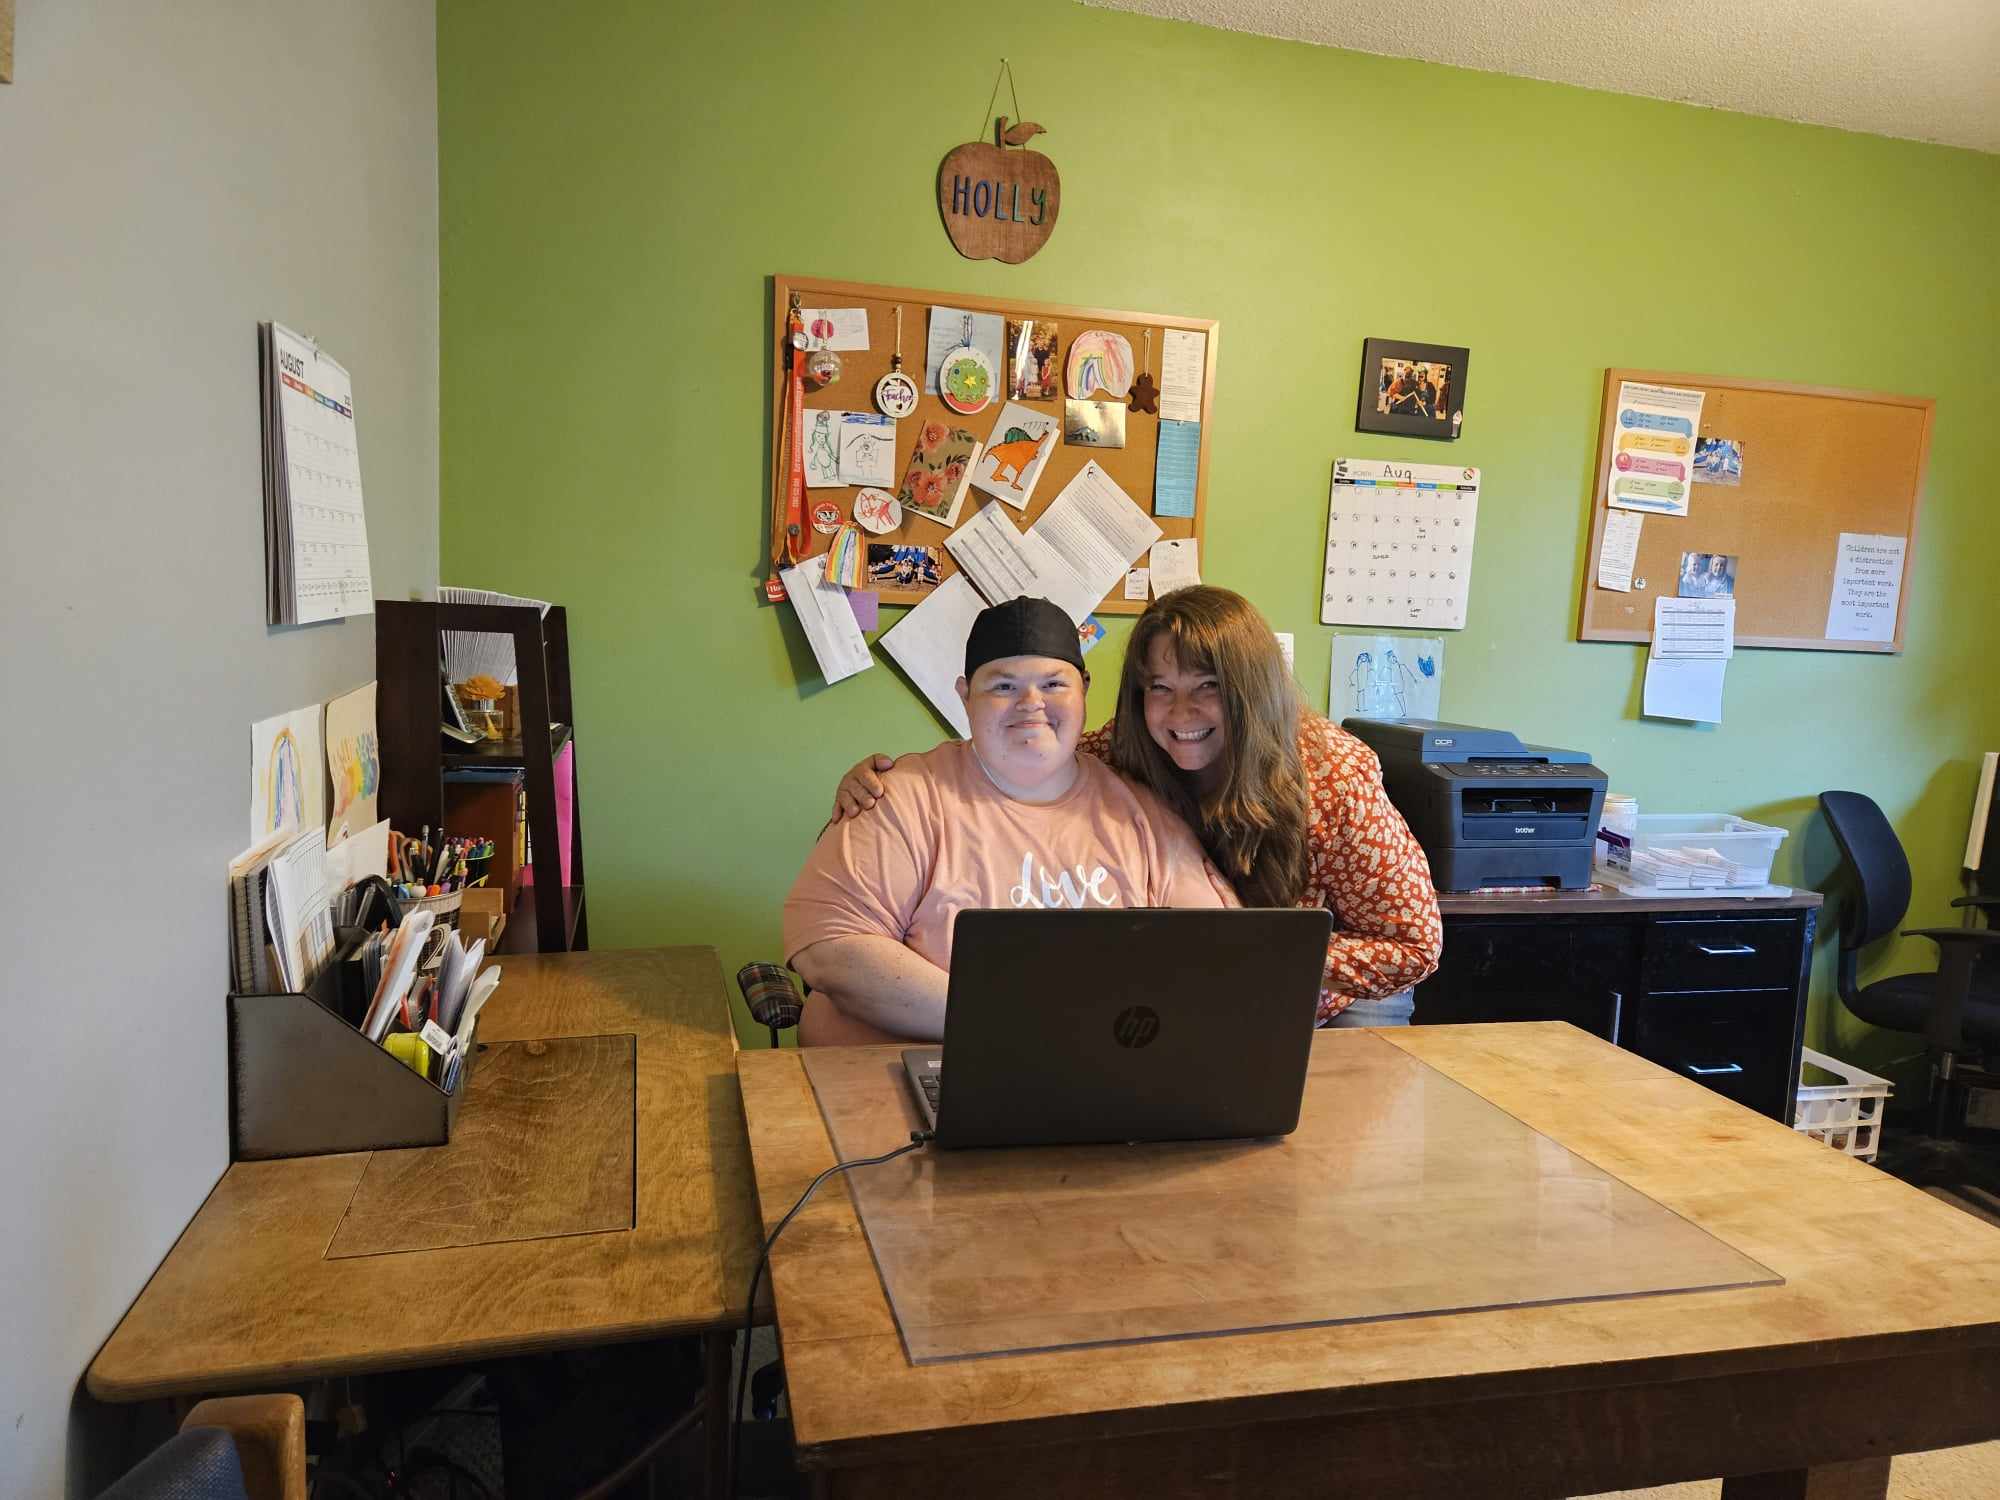 Holly Denman & Kristin Holman-Steffel pose for a picture together at Holly's desk.